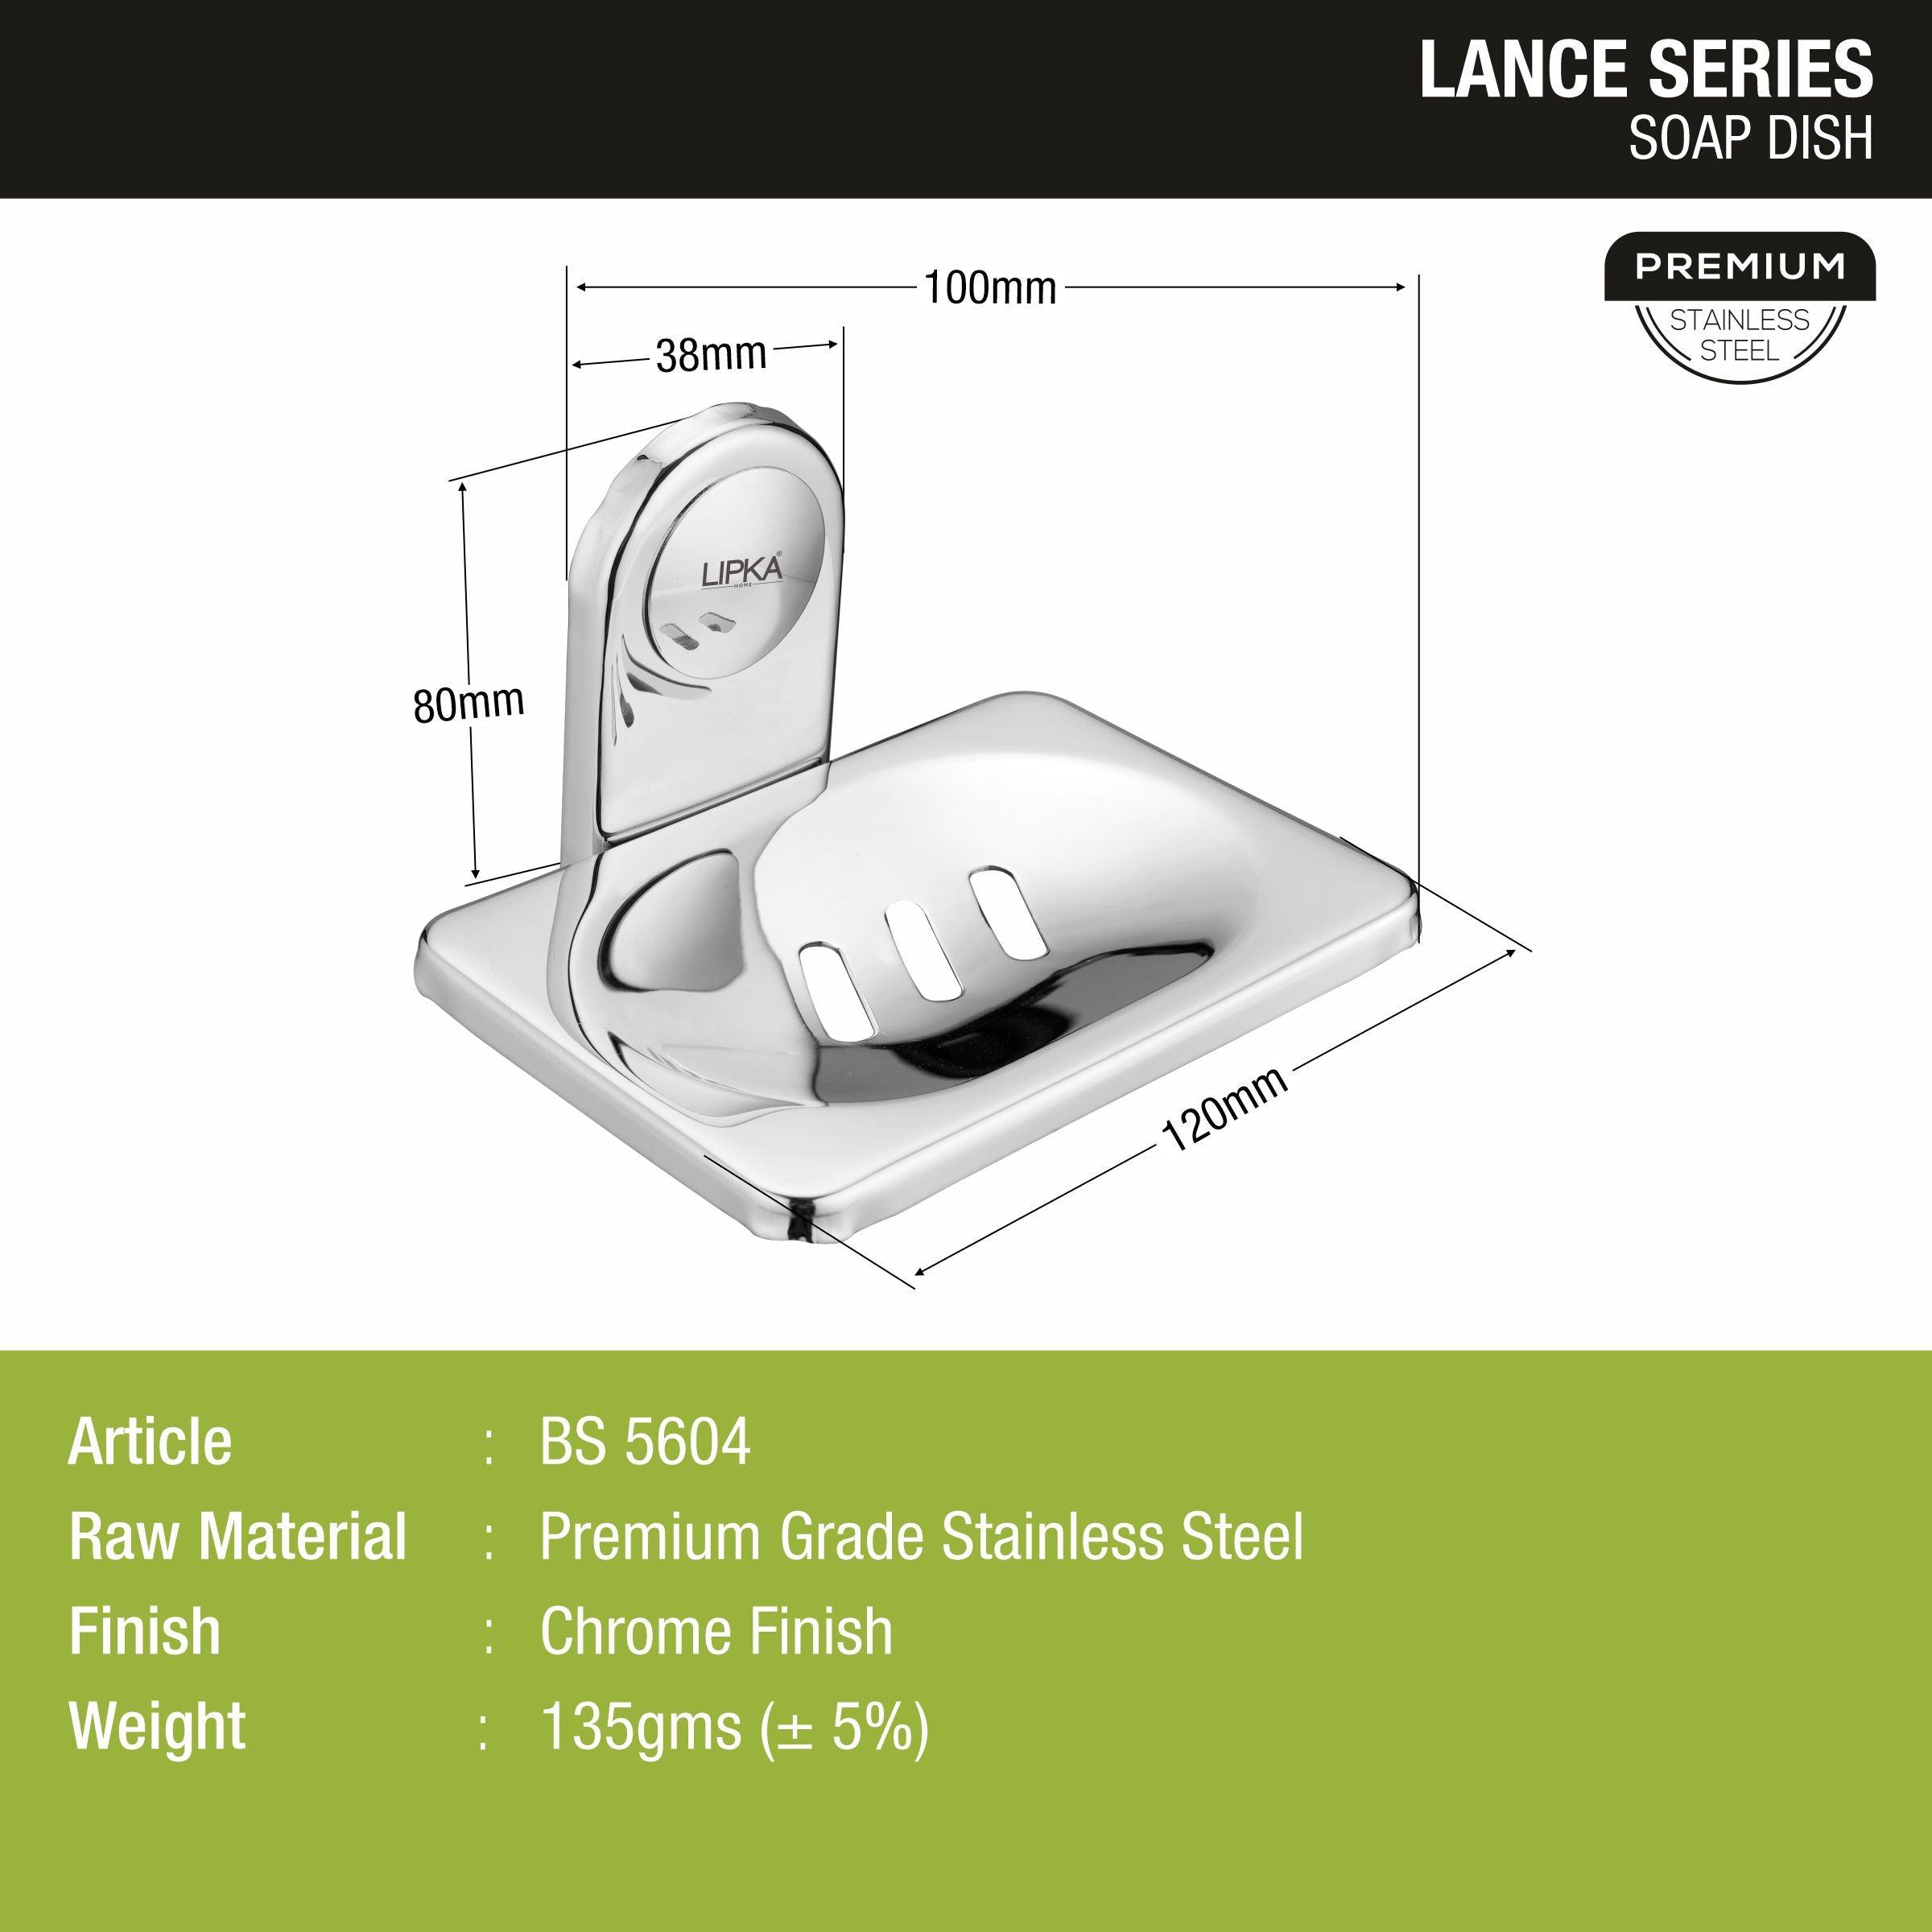 Lance Soap Dish sizes and dimensions